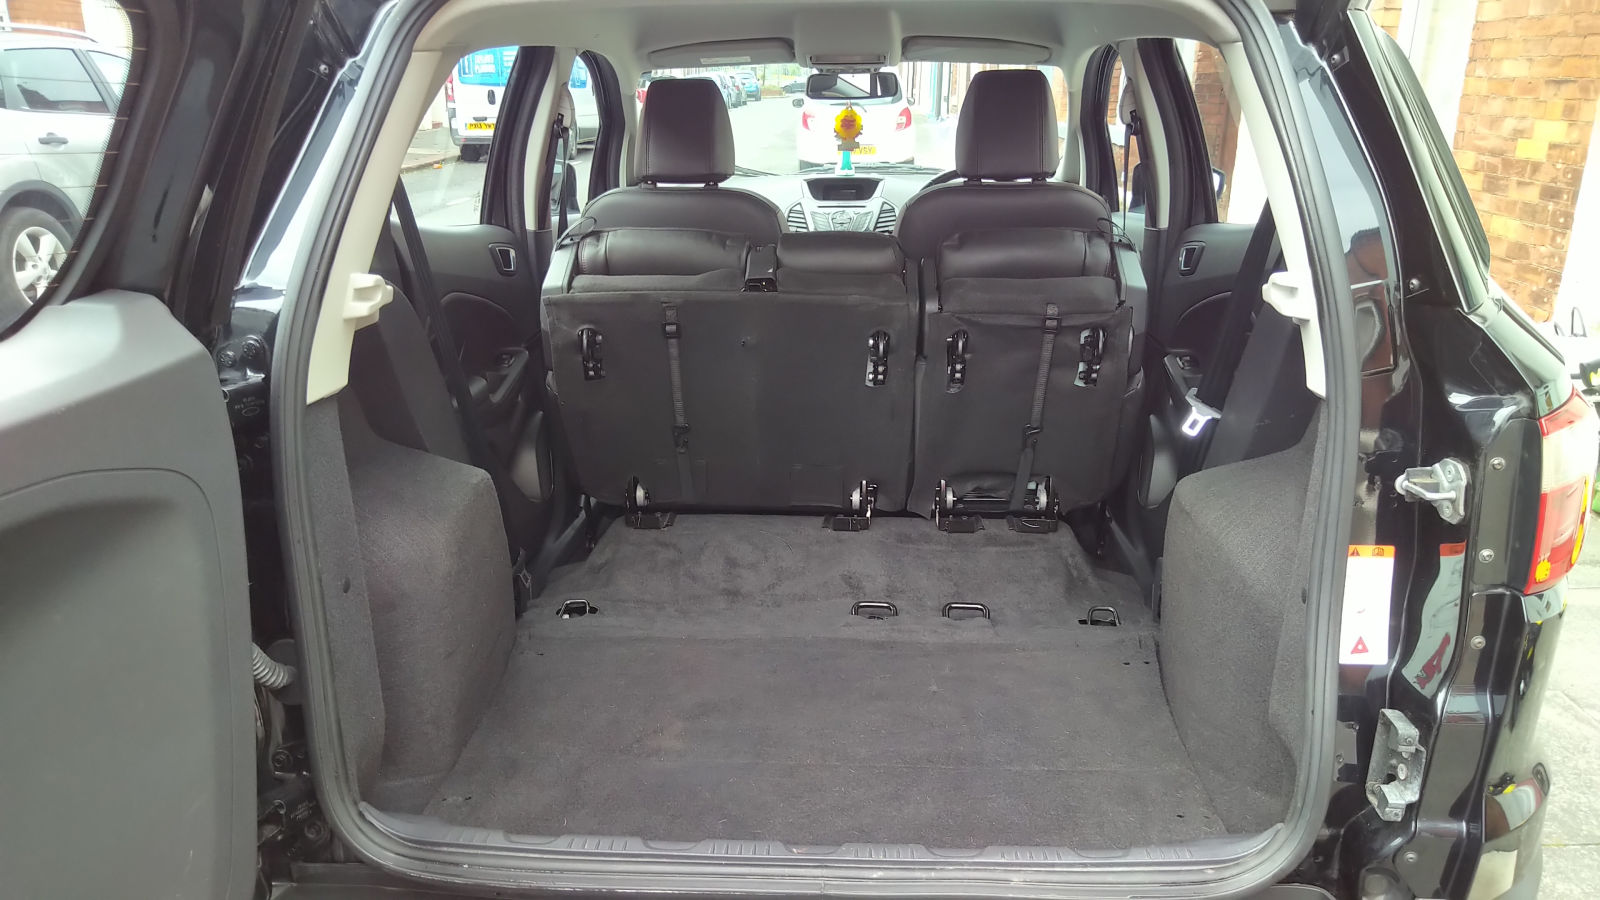 Full size boot, seats folded down and forward 